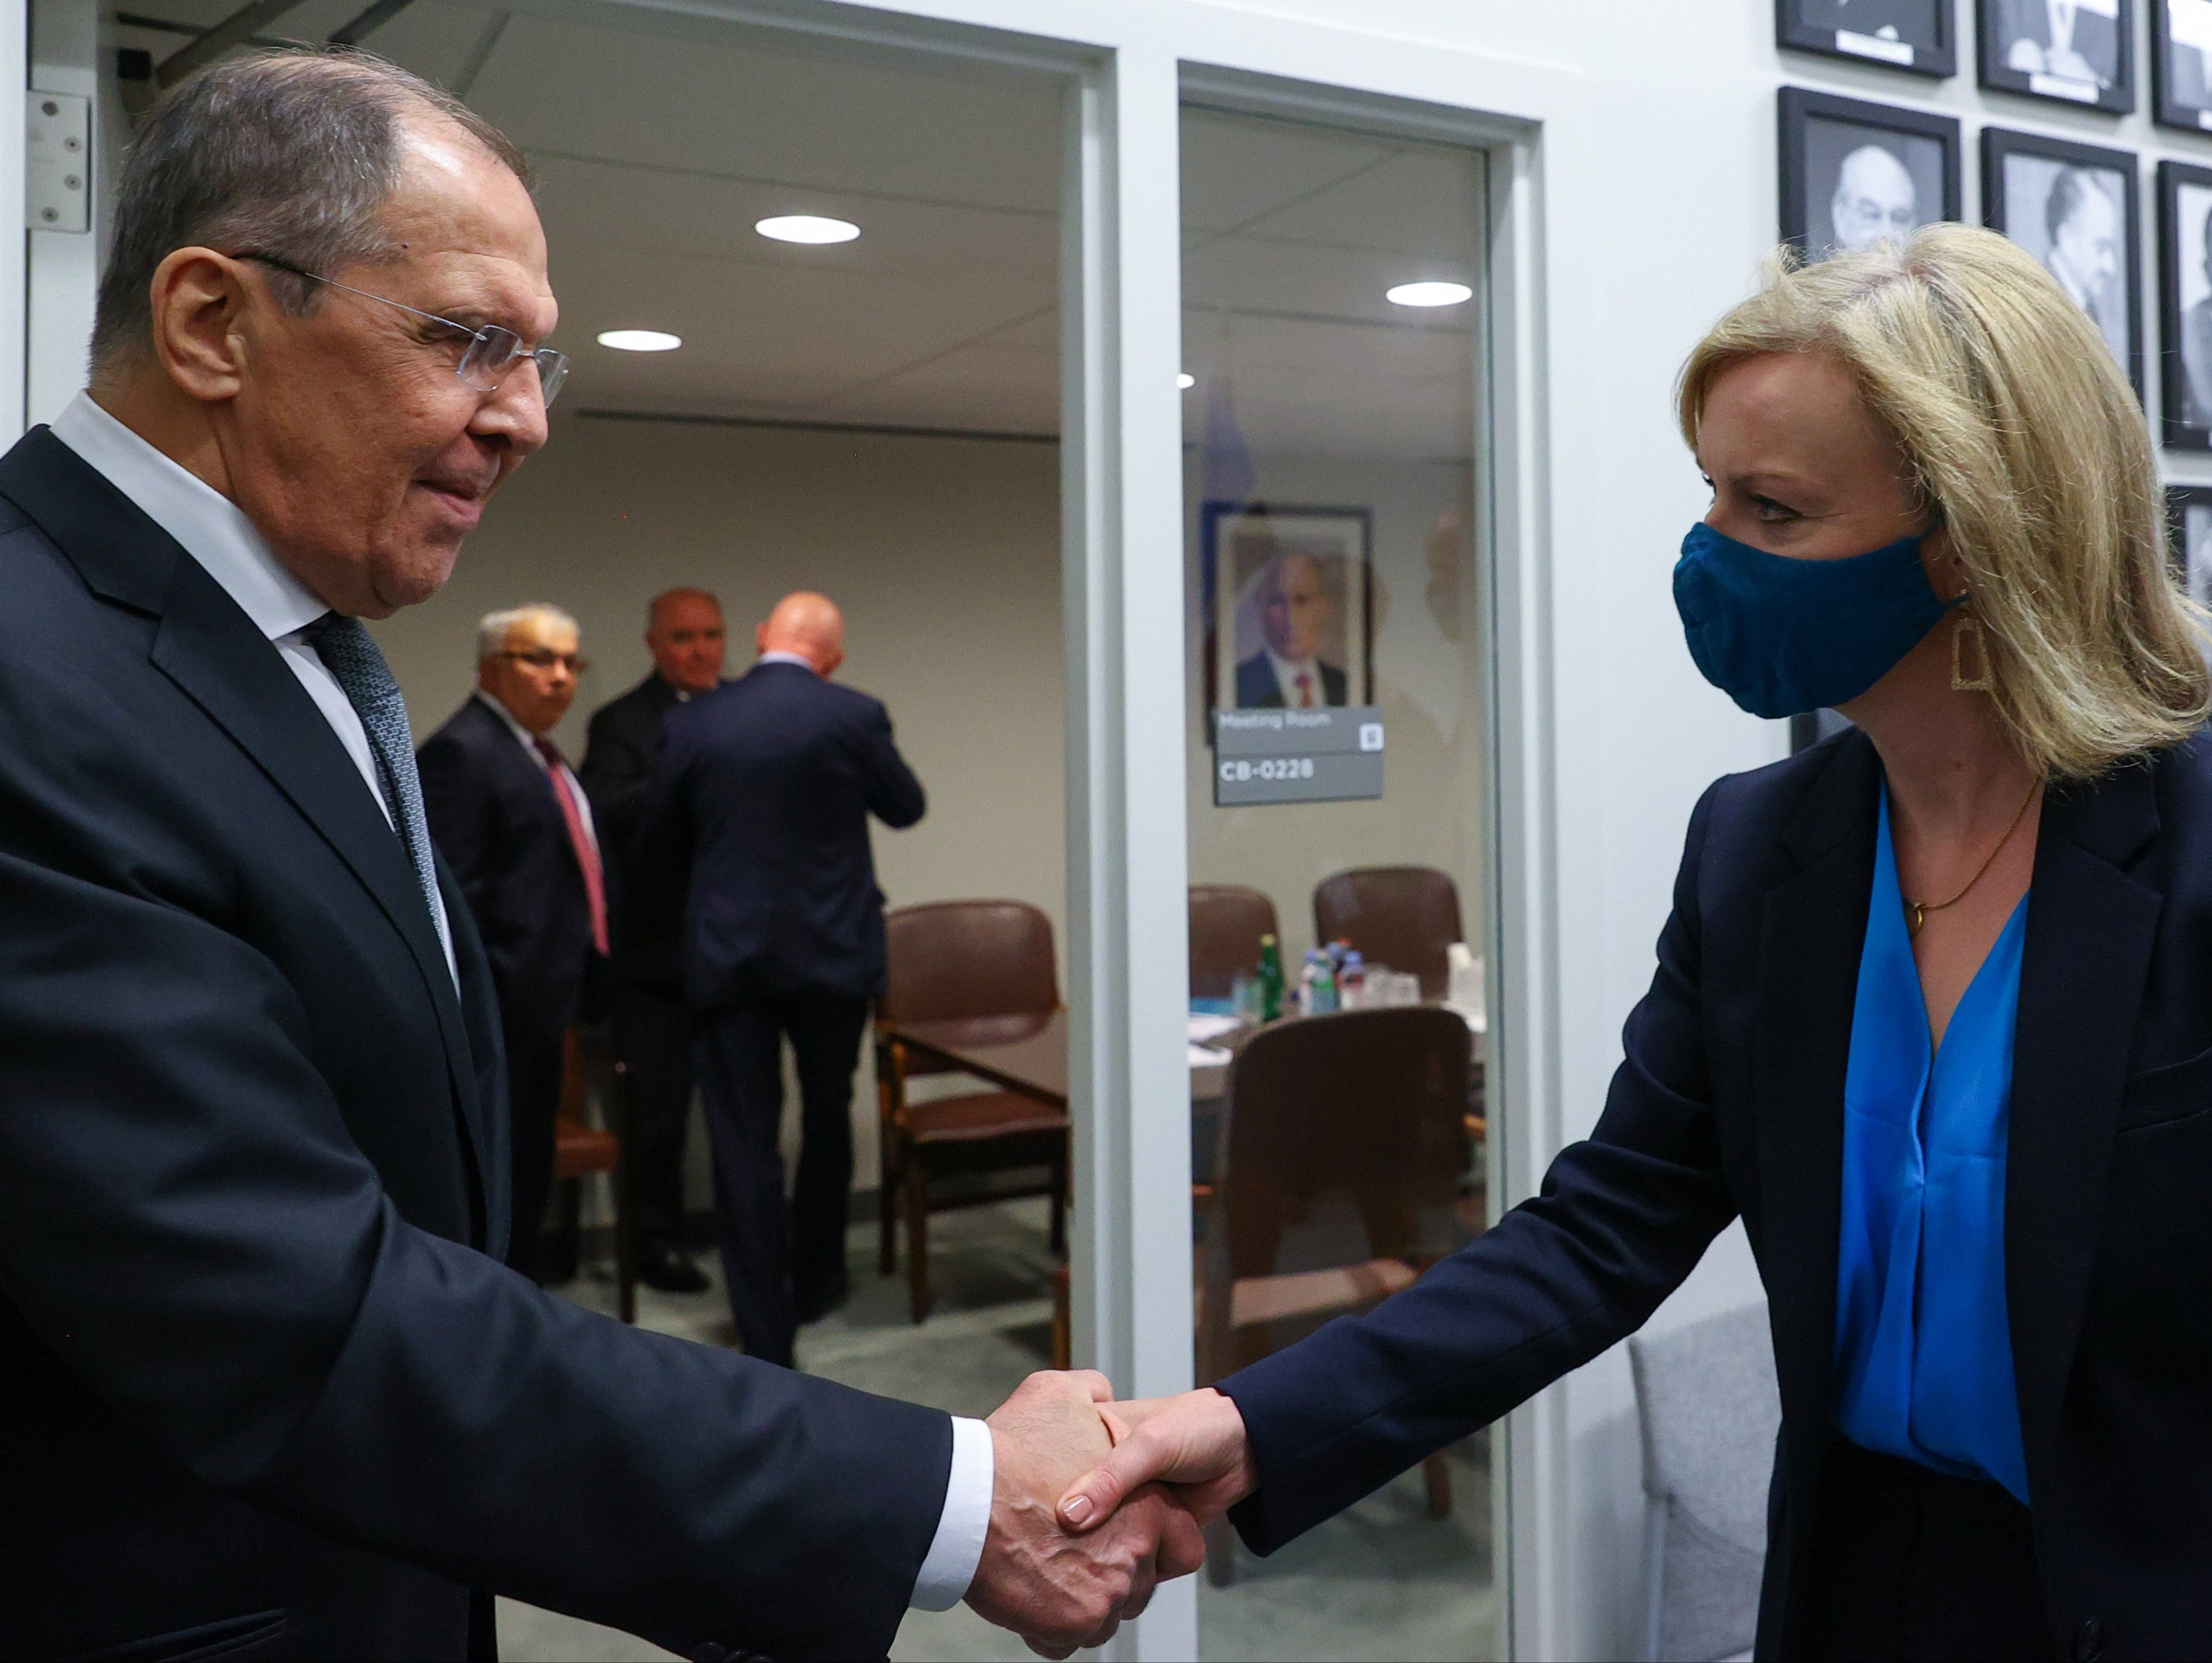 Russia’s Foreign Minister Sergei Lavrov shakes hands with Britain’s Foreign Secretary Liz Truss during a meeting on the sidelines of the 76th Session of the United Nations General Assembly on 22 September 2021